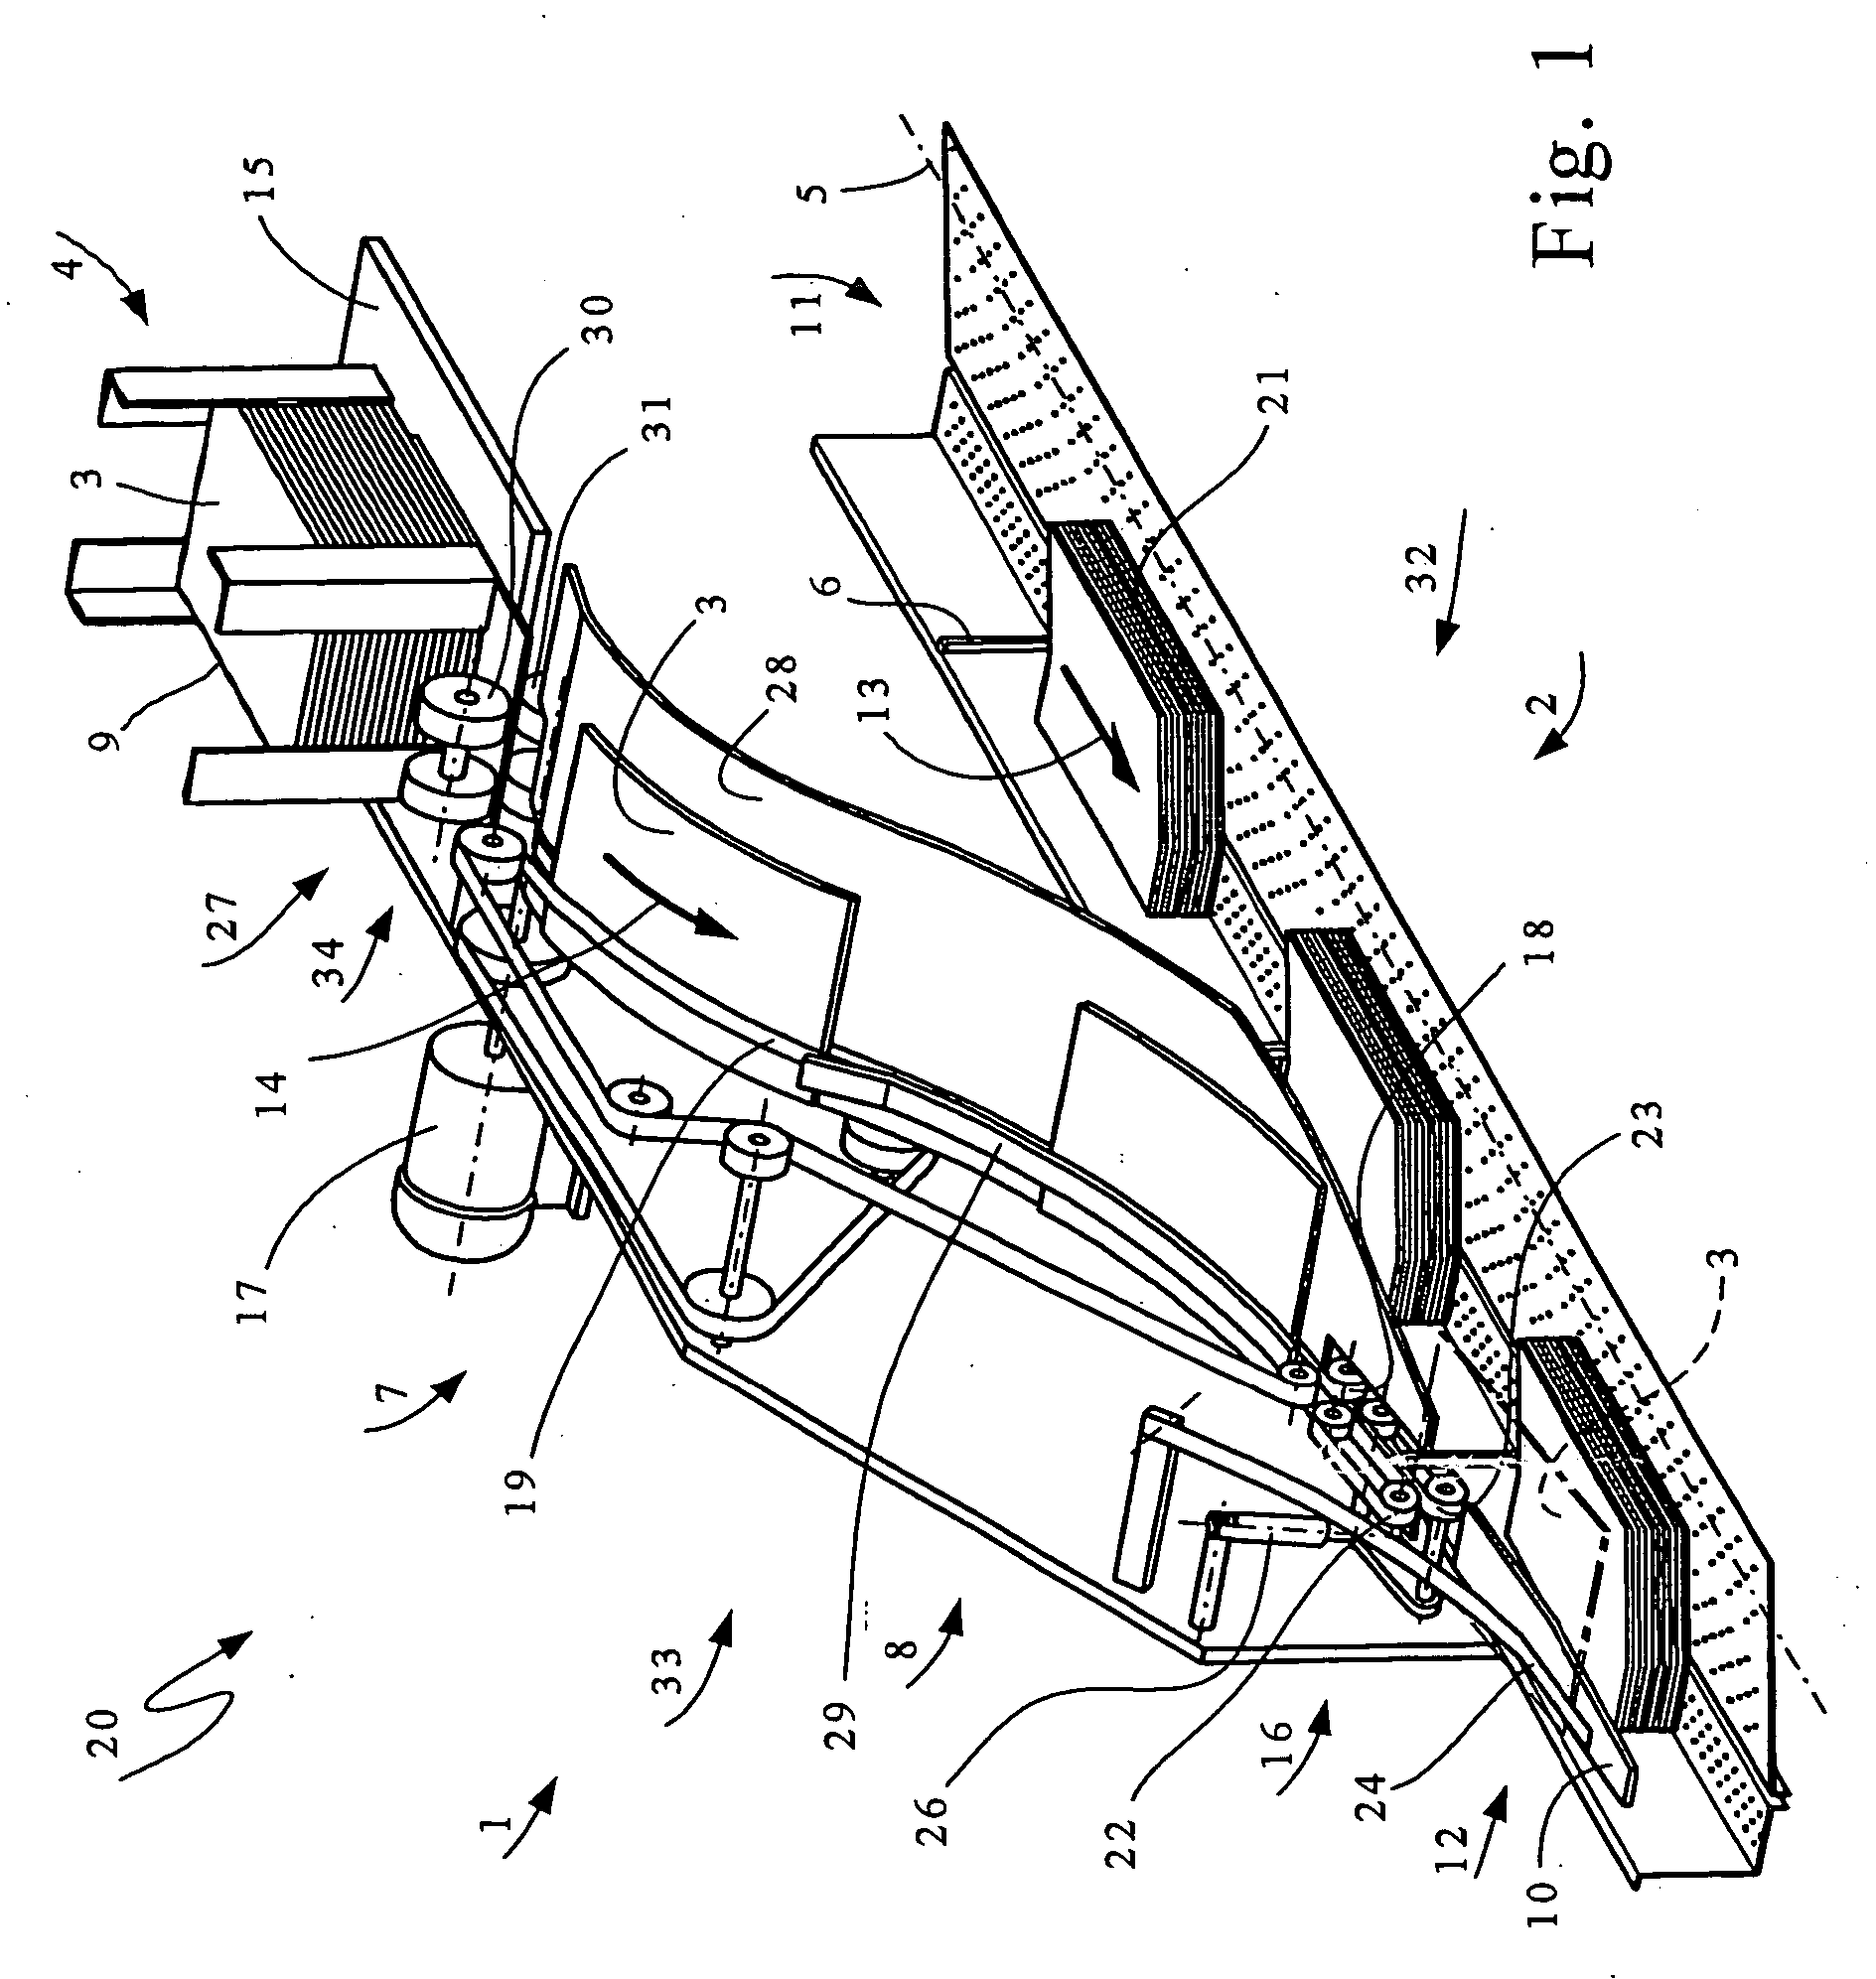 Apparatus for gathering signatures along a conveying section of a circulating conveyor